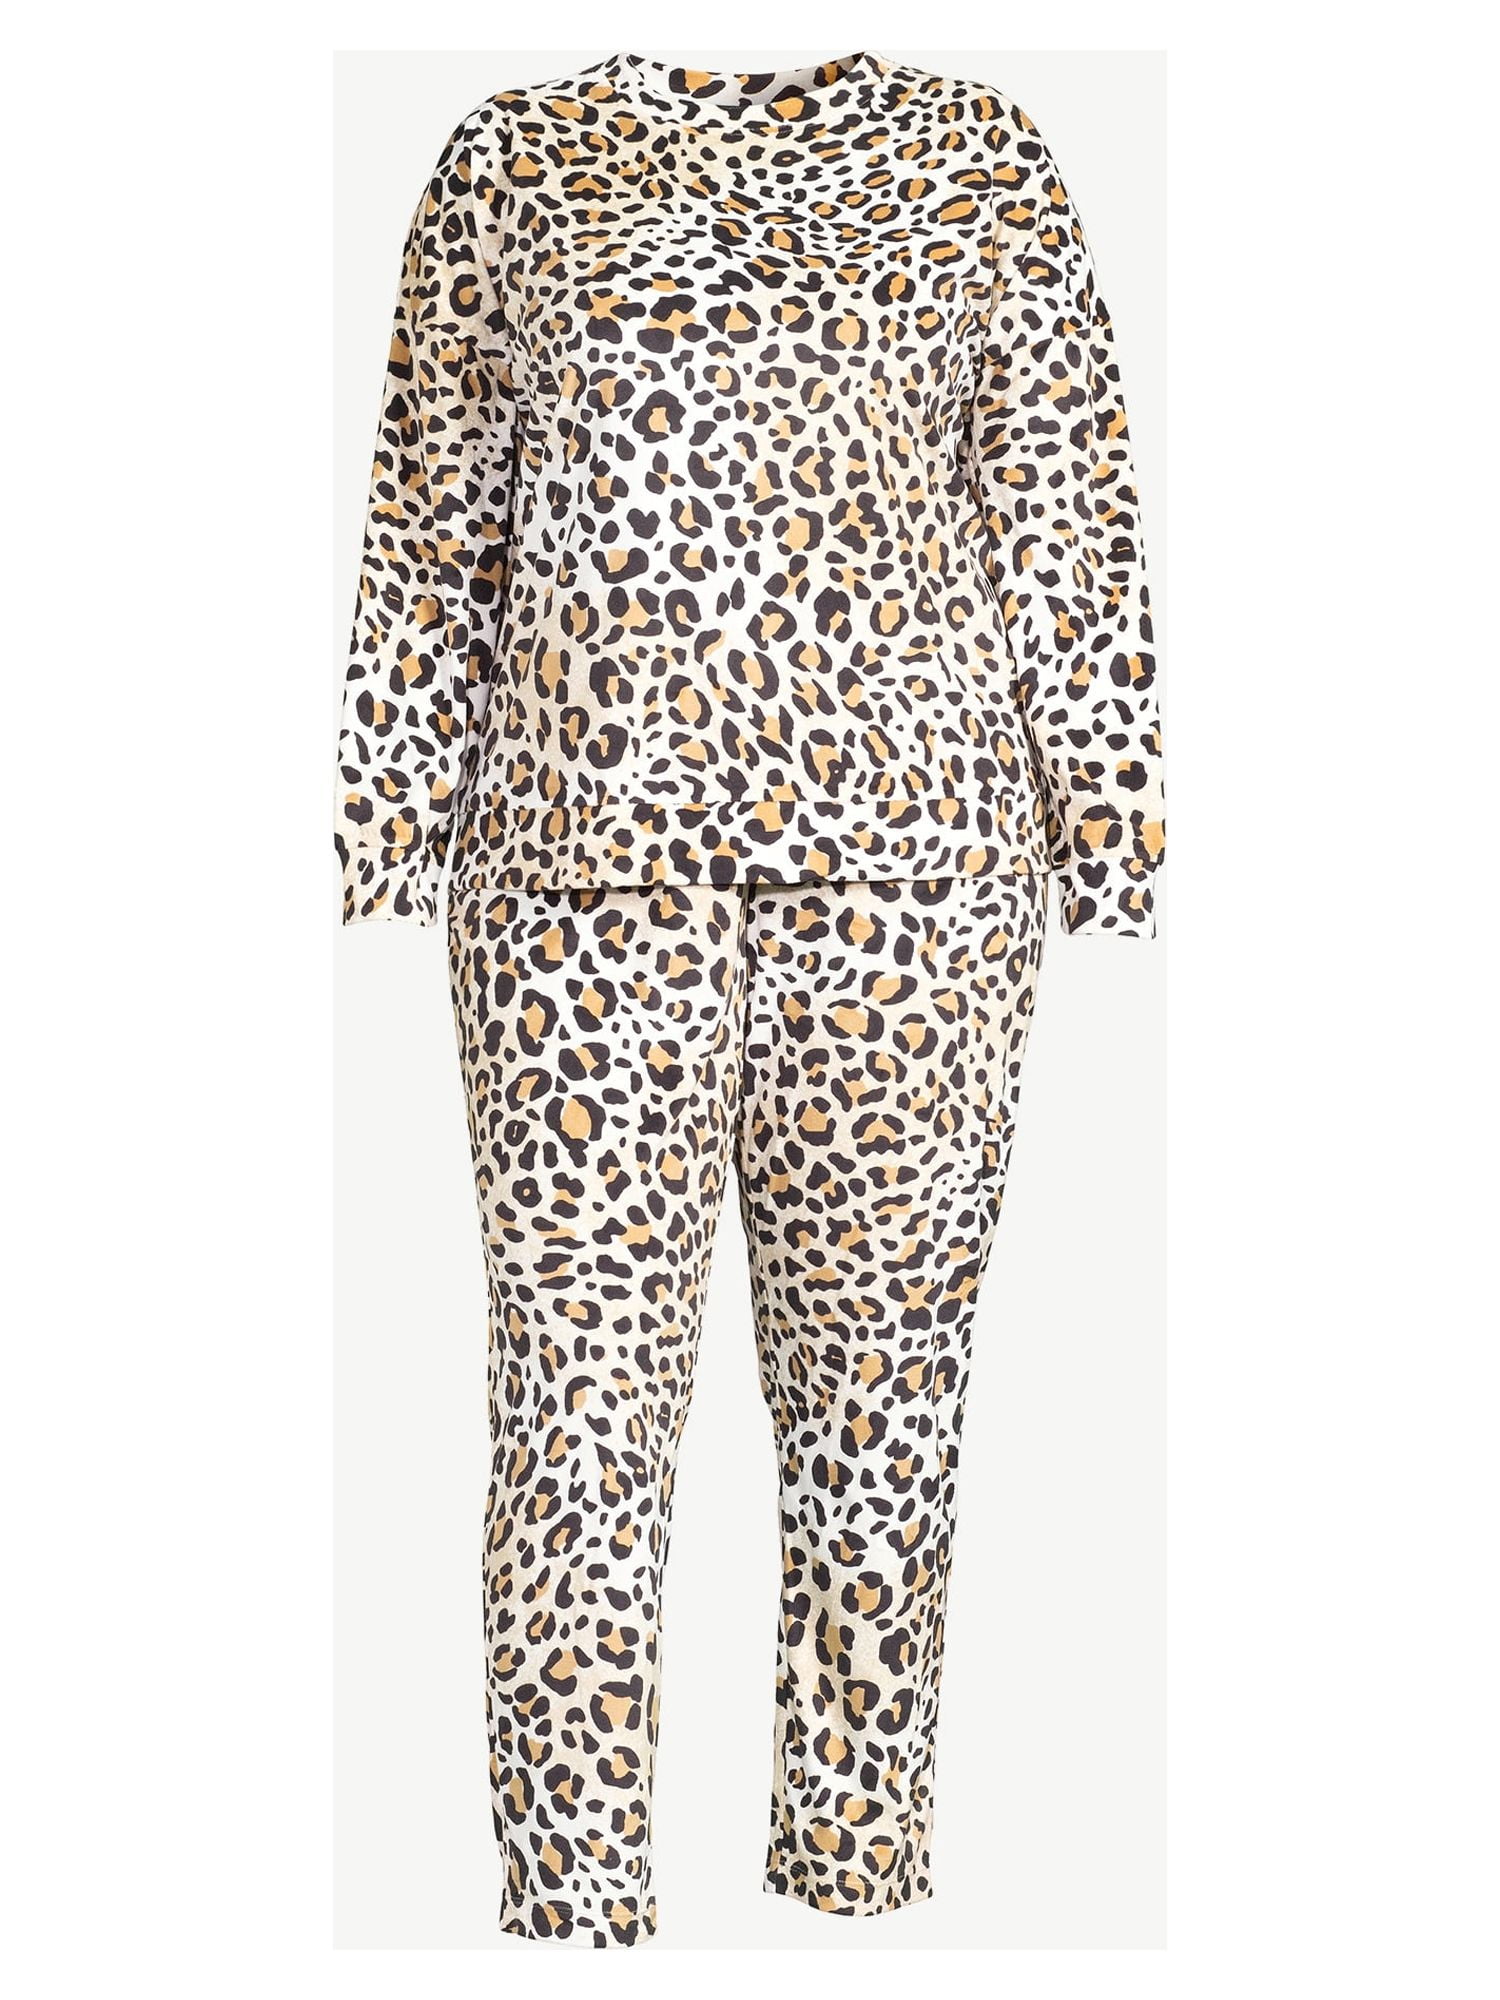 ShoSho One Piece Pajamas Size M Animal Print Skulls Long Sleeve-Soft•NWT  for Sale in Tacoma, WA - OfferUp